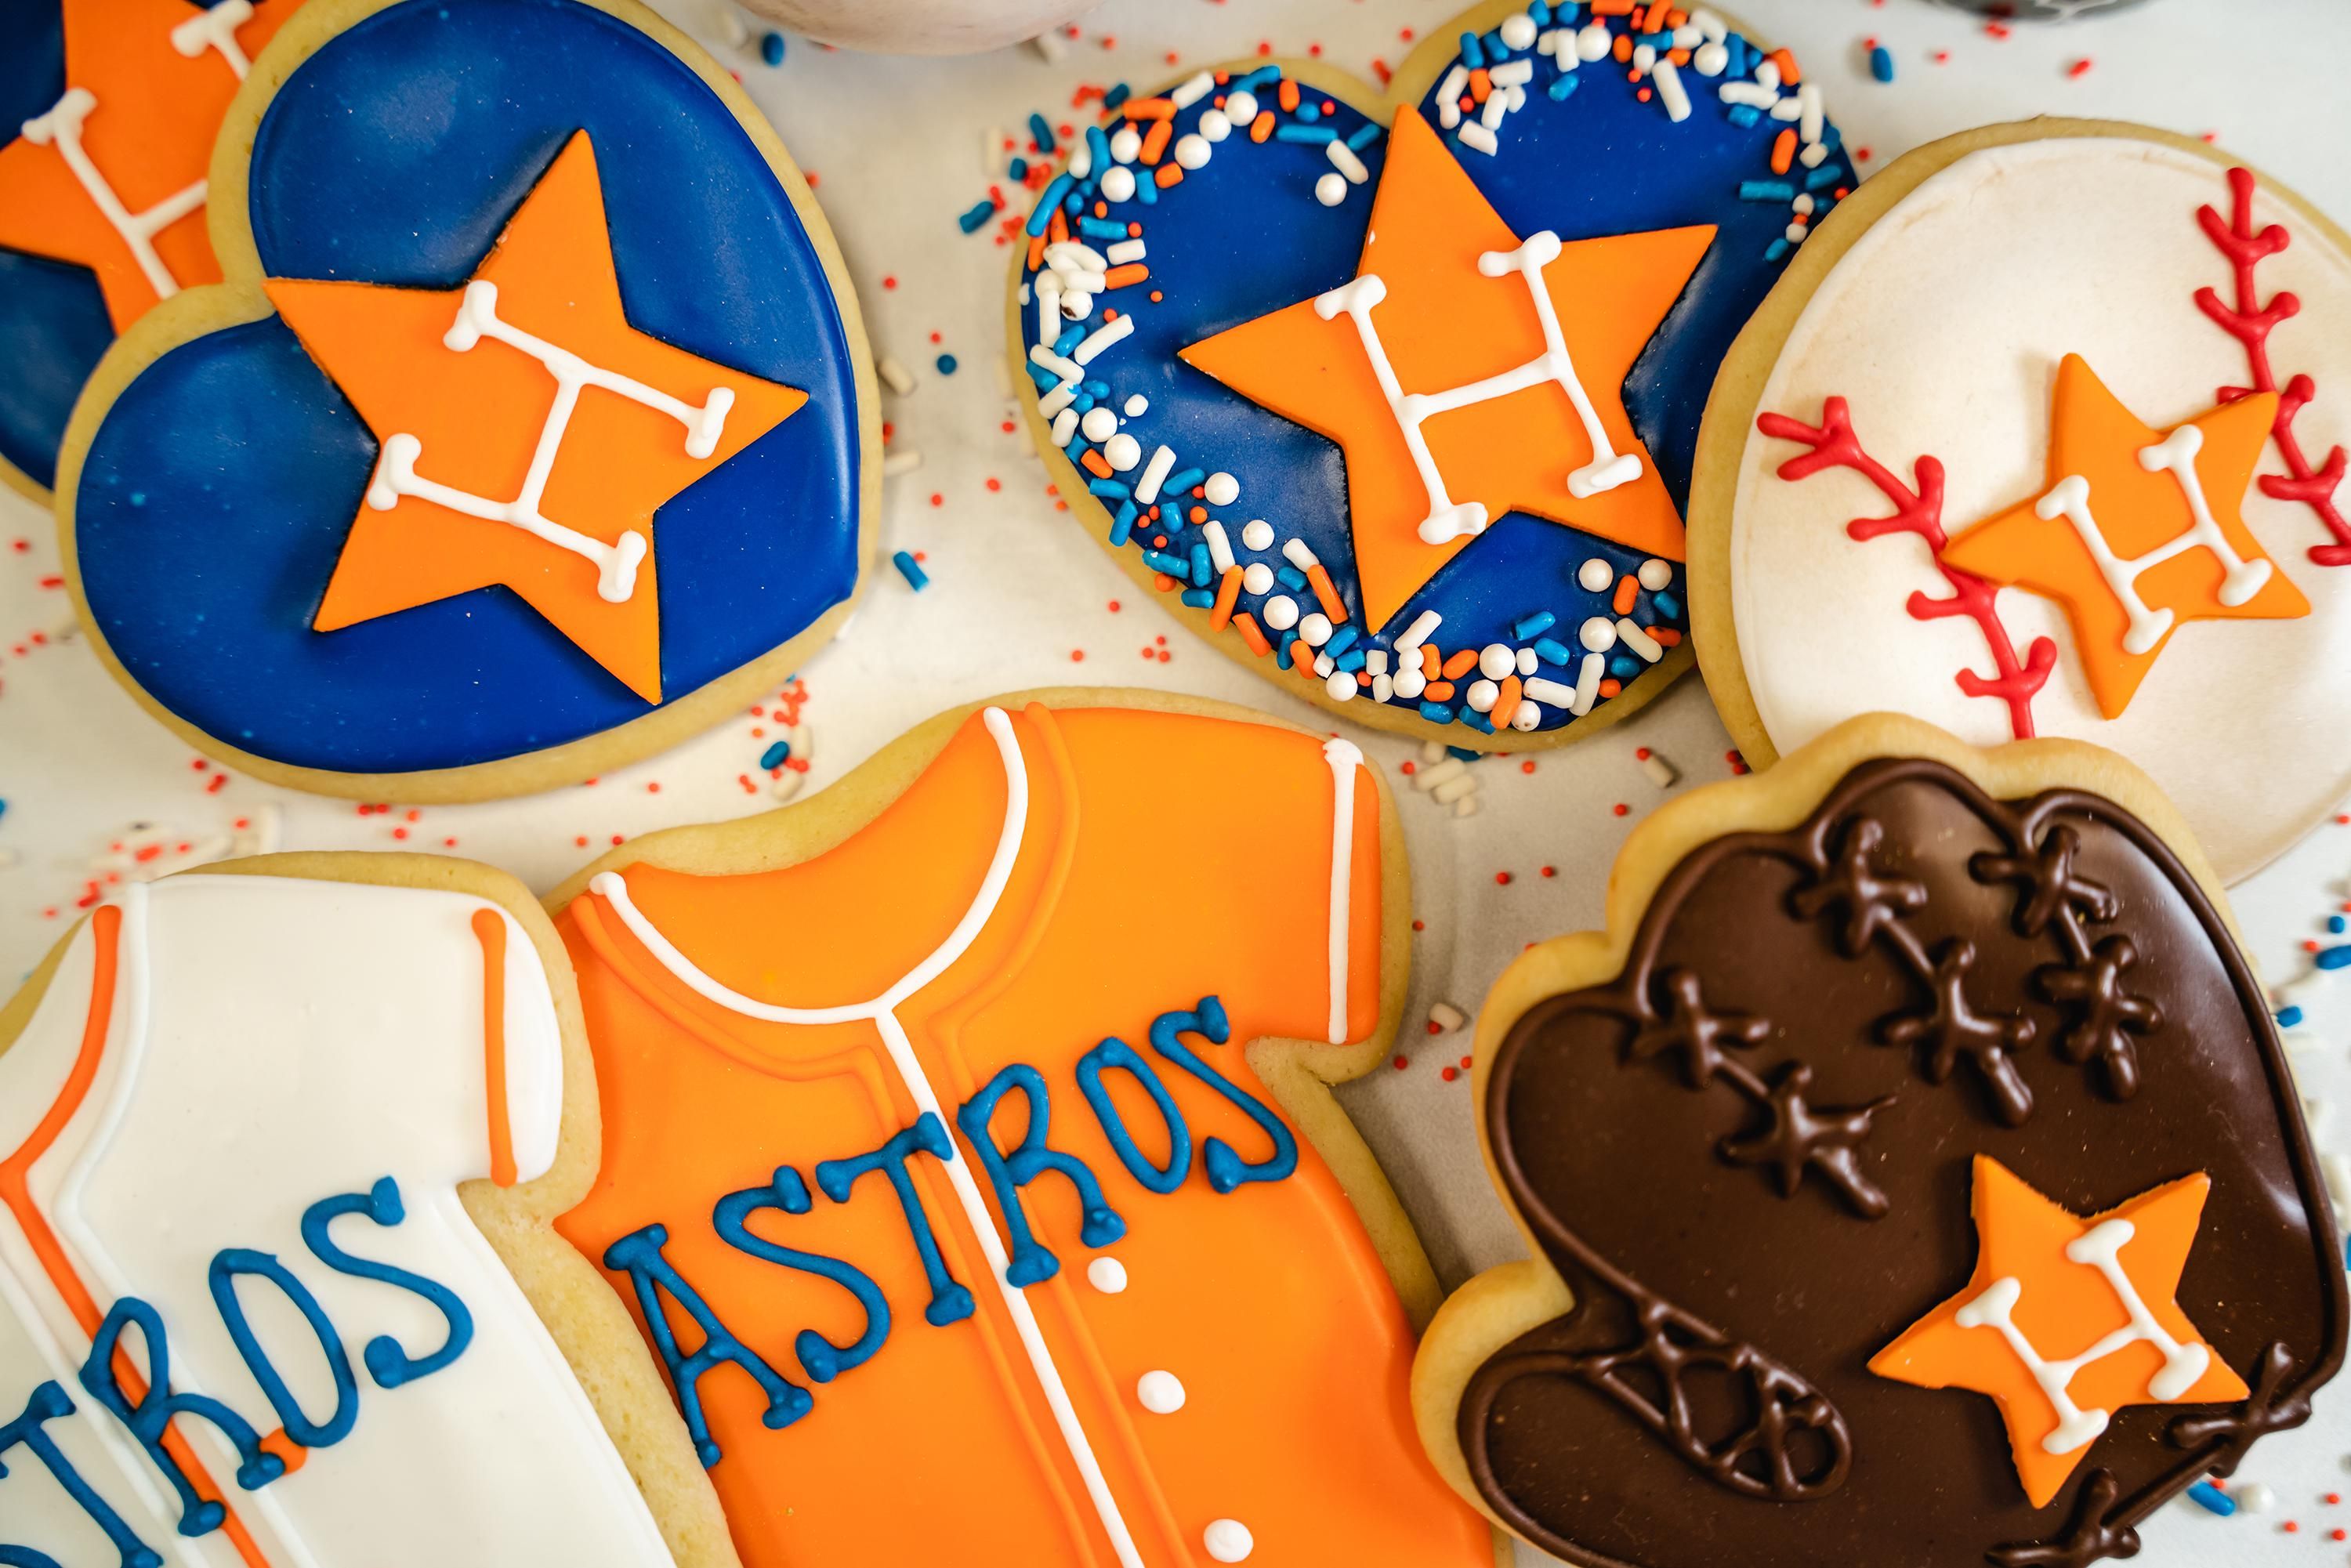 2022 World Series: Houston Astros unveil new Gold Rush collection